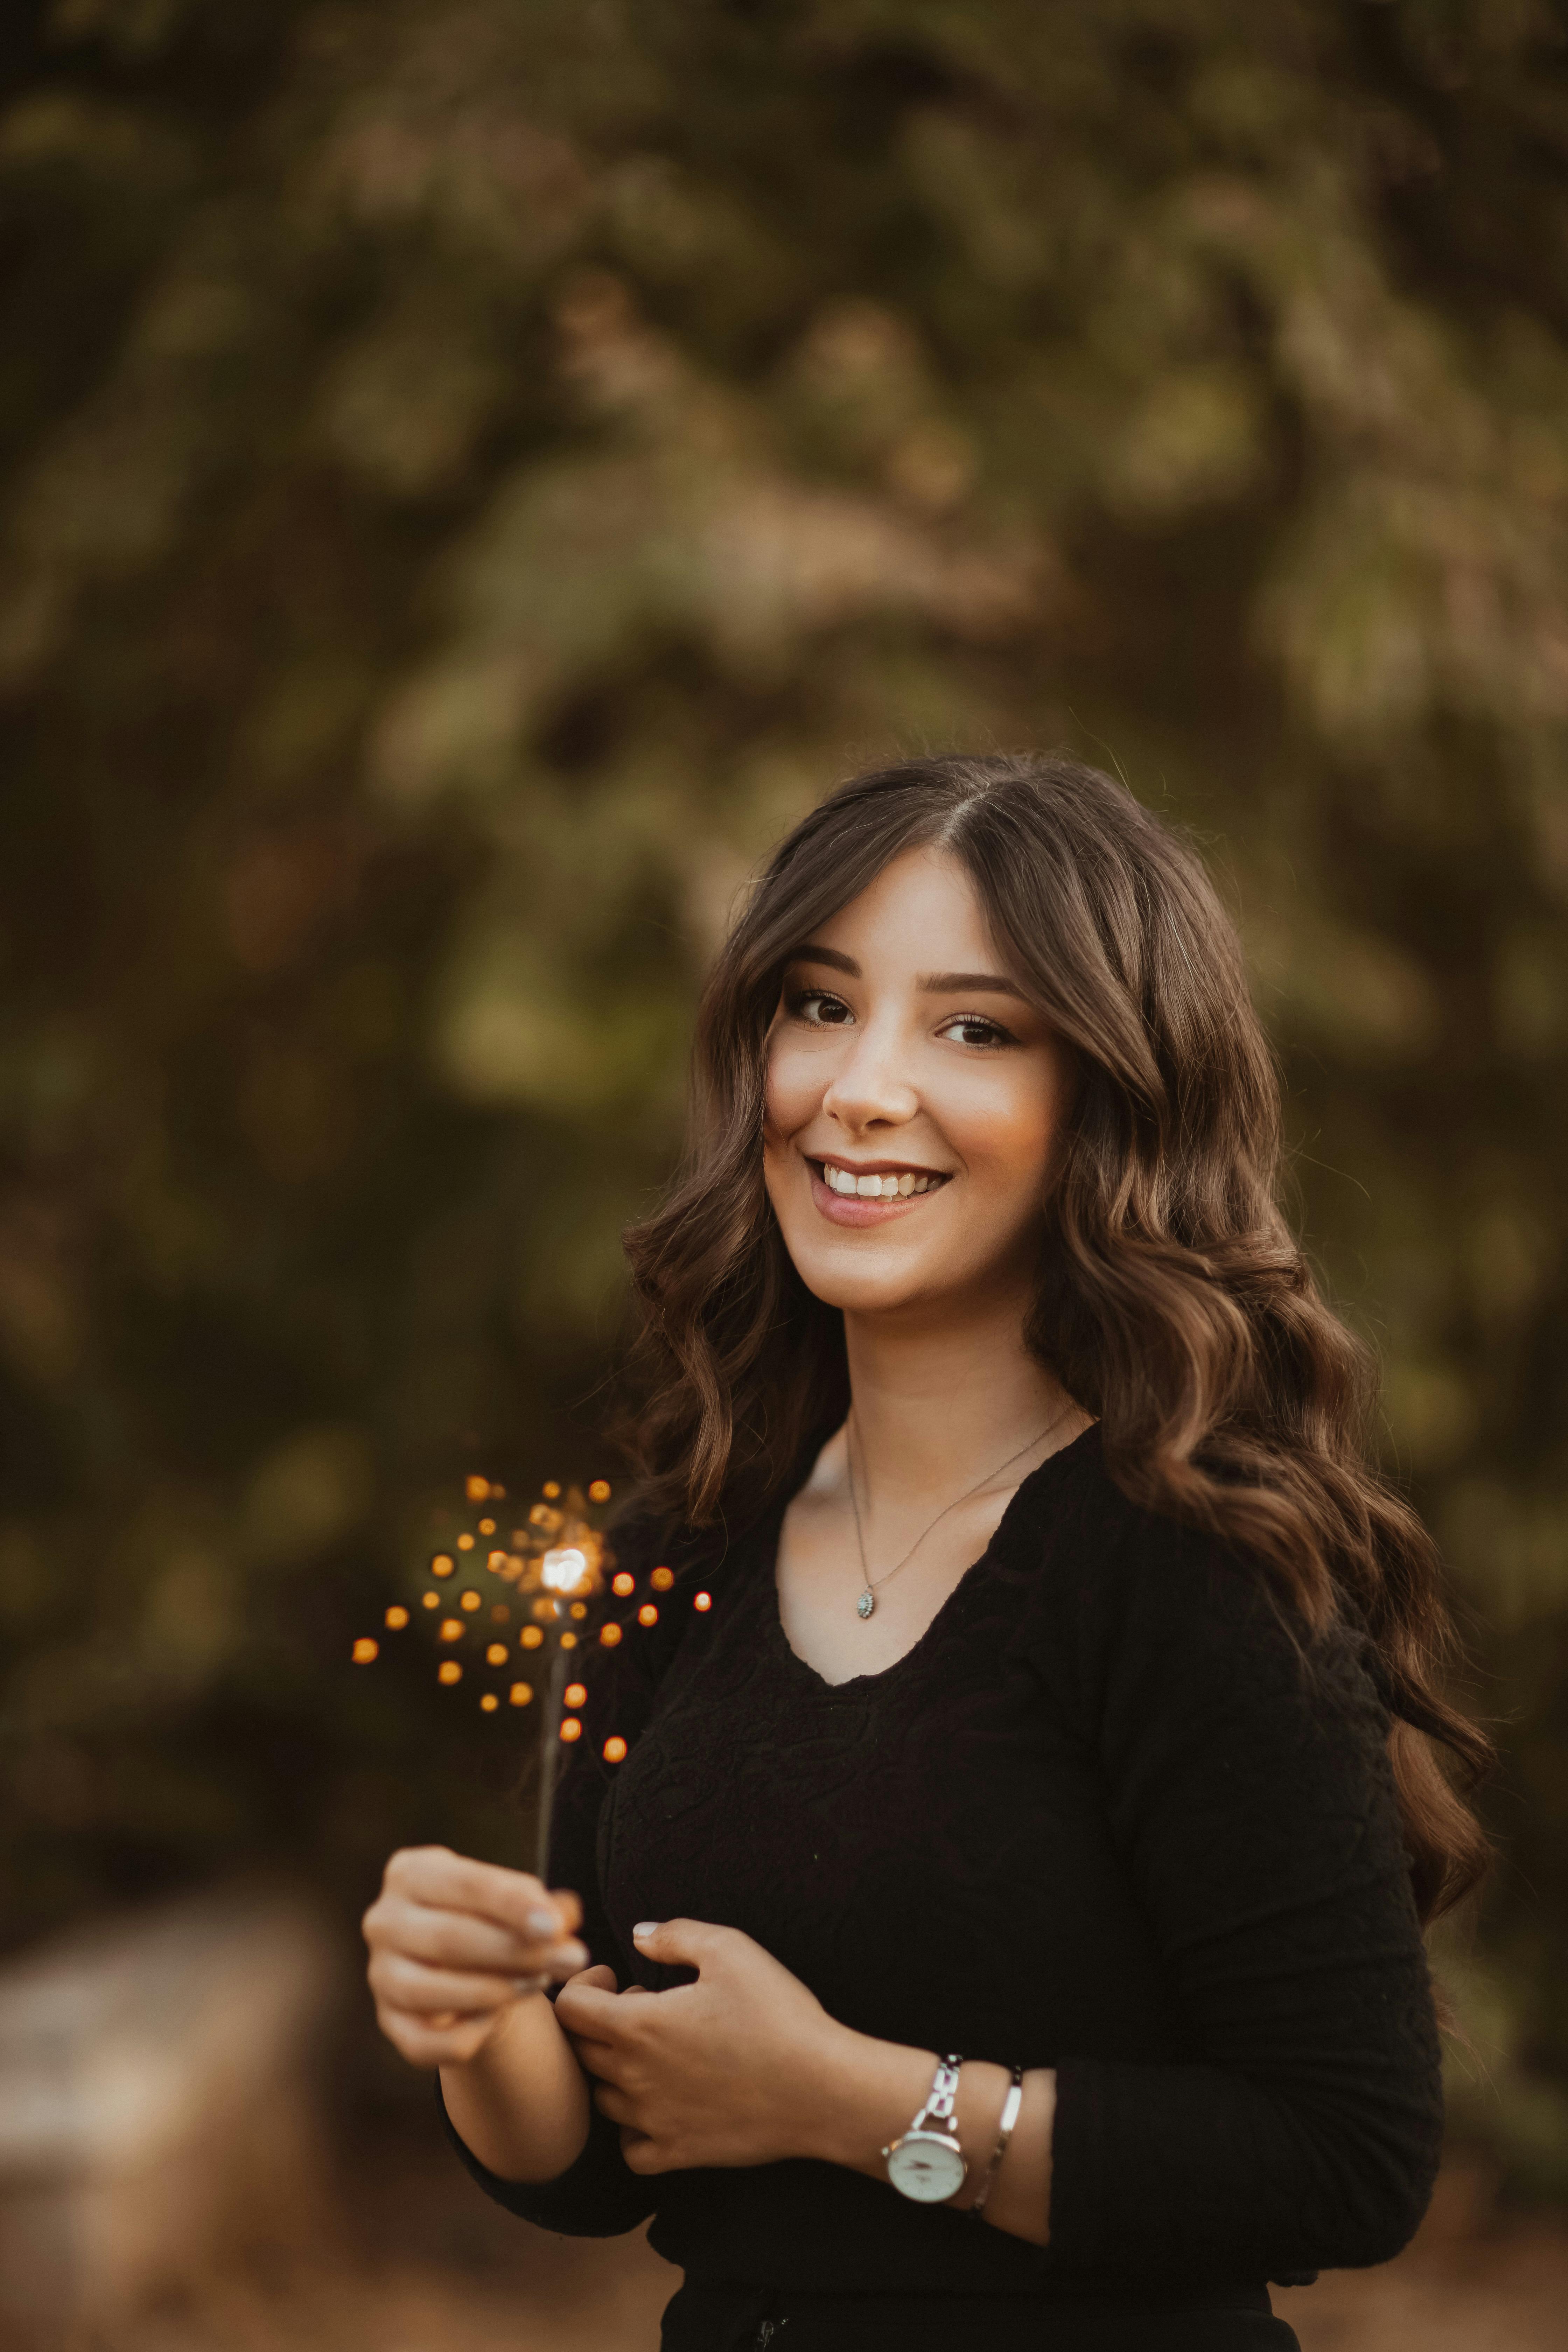 Adolescent Pretty Girl with Long Wavy Hair Holding Sparkler · Free Stock  Photo